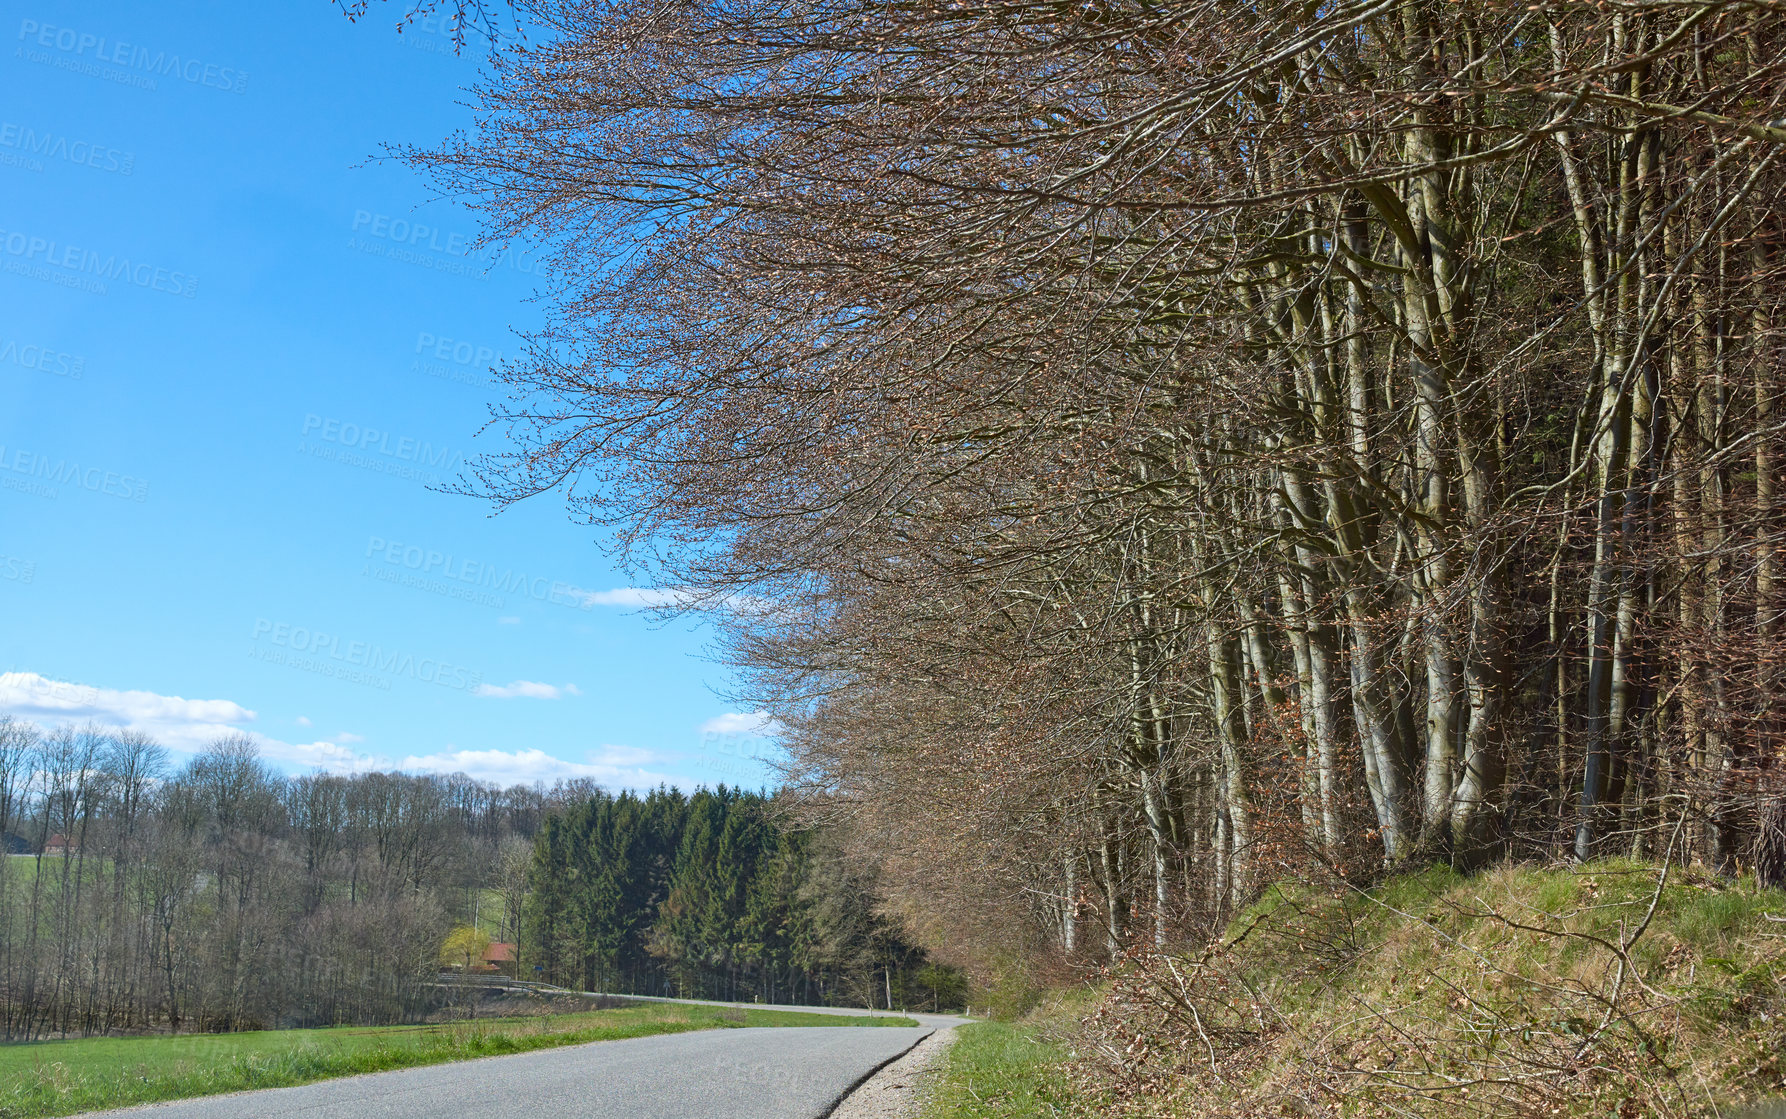 Buy stock photo A countryside road in spring with blue sky background and copy space. A nature landscape of an empty roadway winding through forest trees with regrowth in a sustainable eco environment on a sunny day